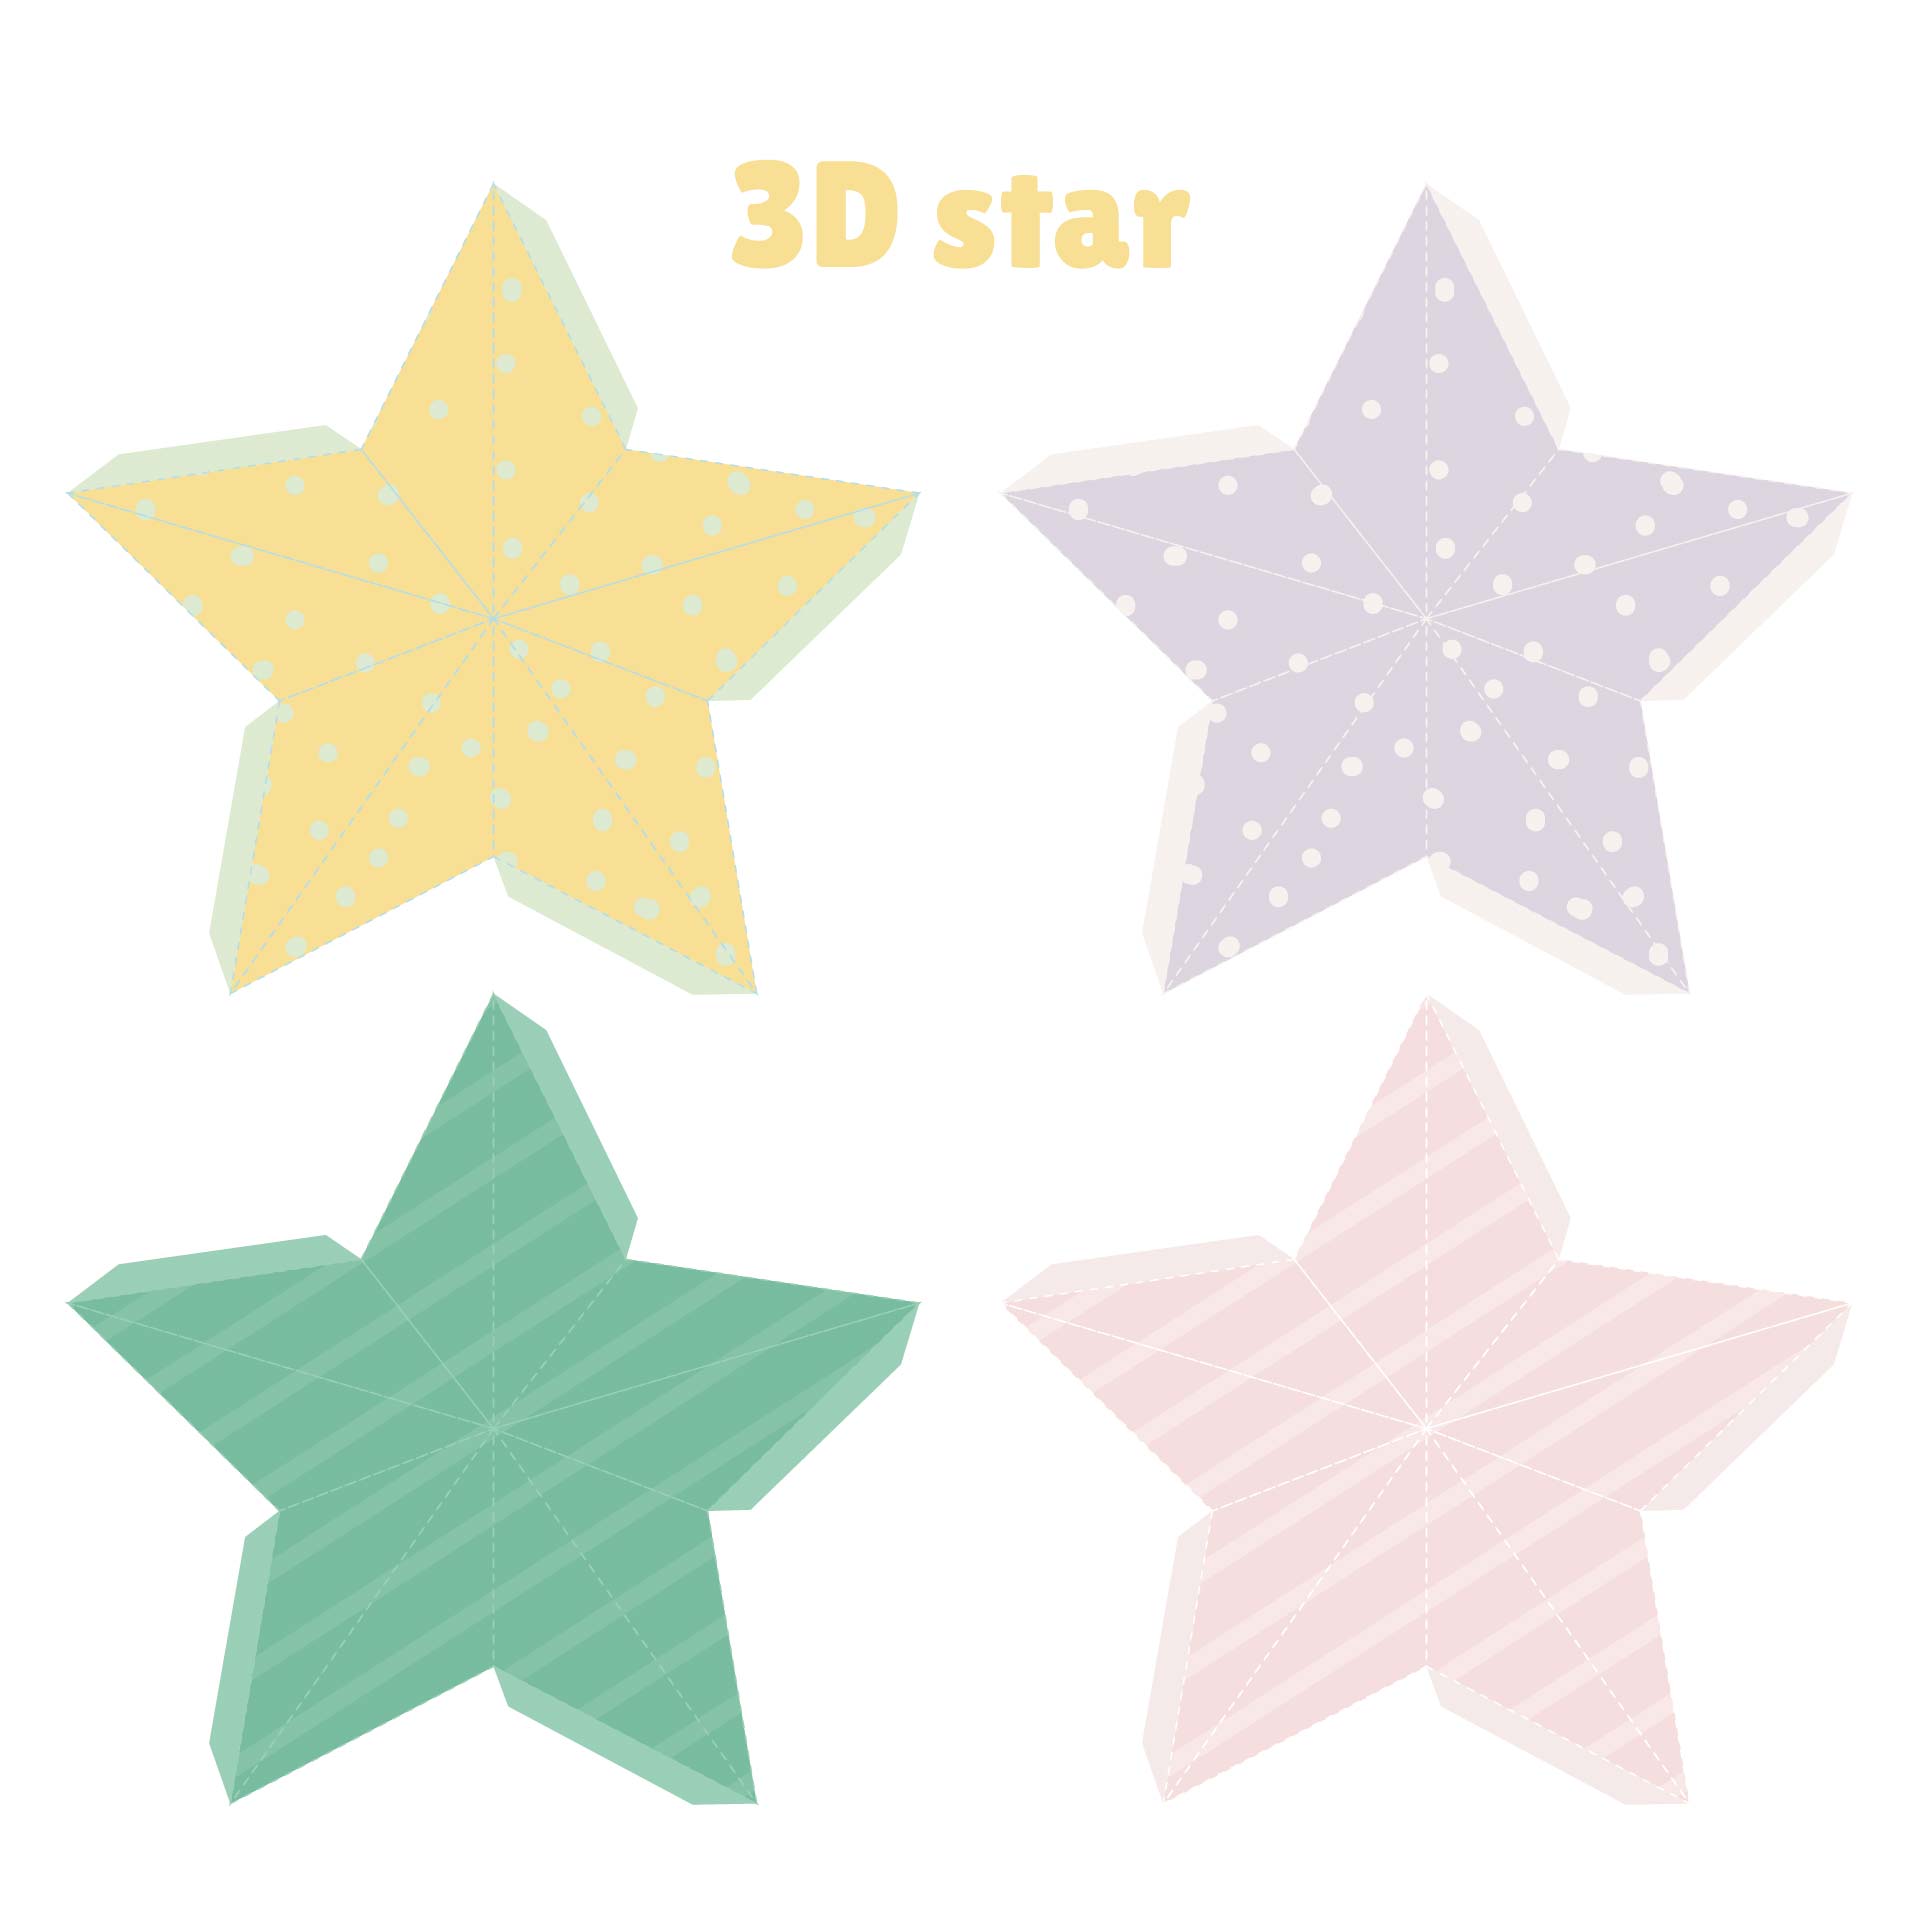 5 Best Images of 3D Star Printable Template - 3D Christmas Star ...